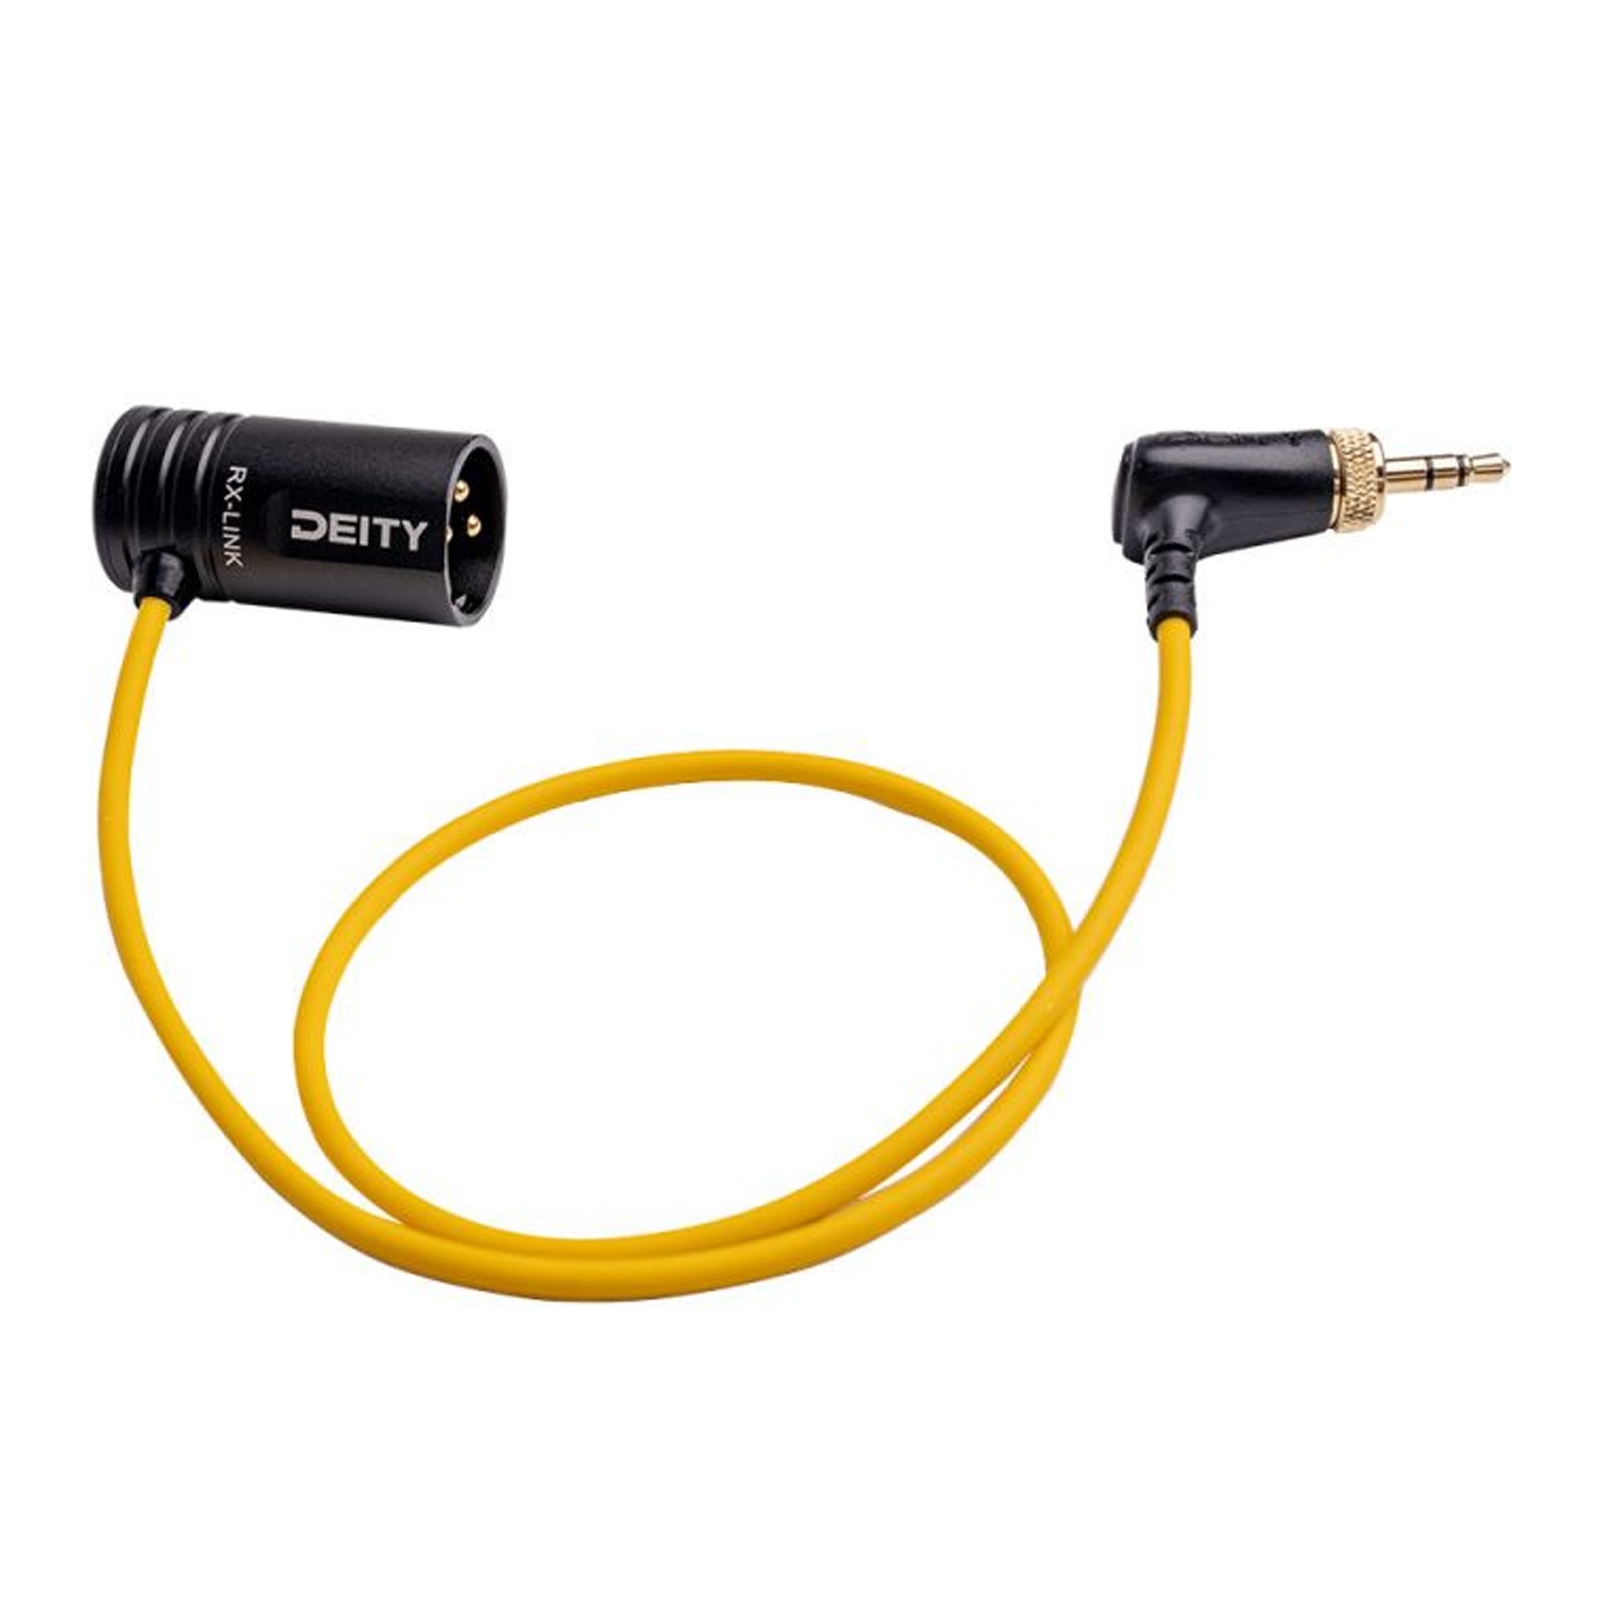 Deity RX-LINK (Low Profile XLR to 3.5mm TRS cable)